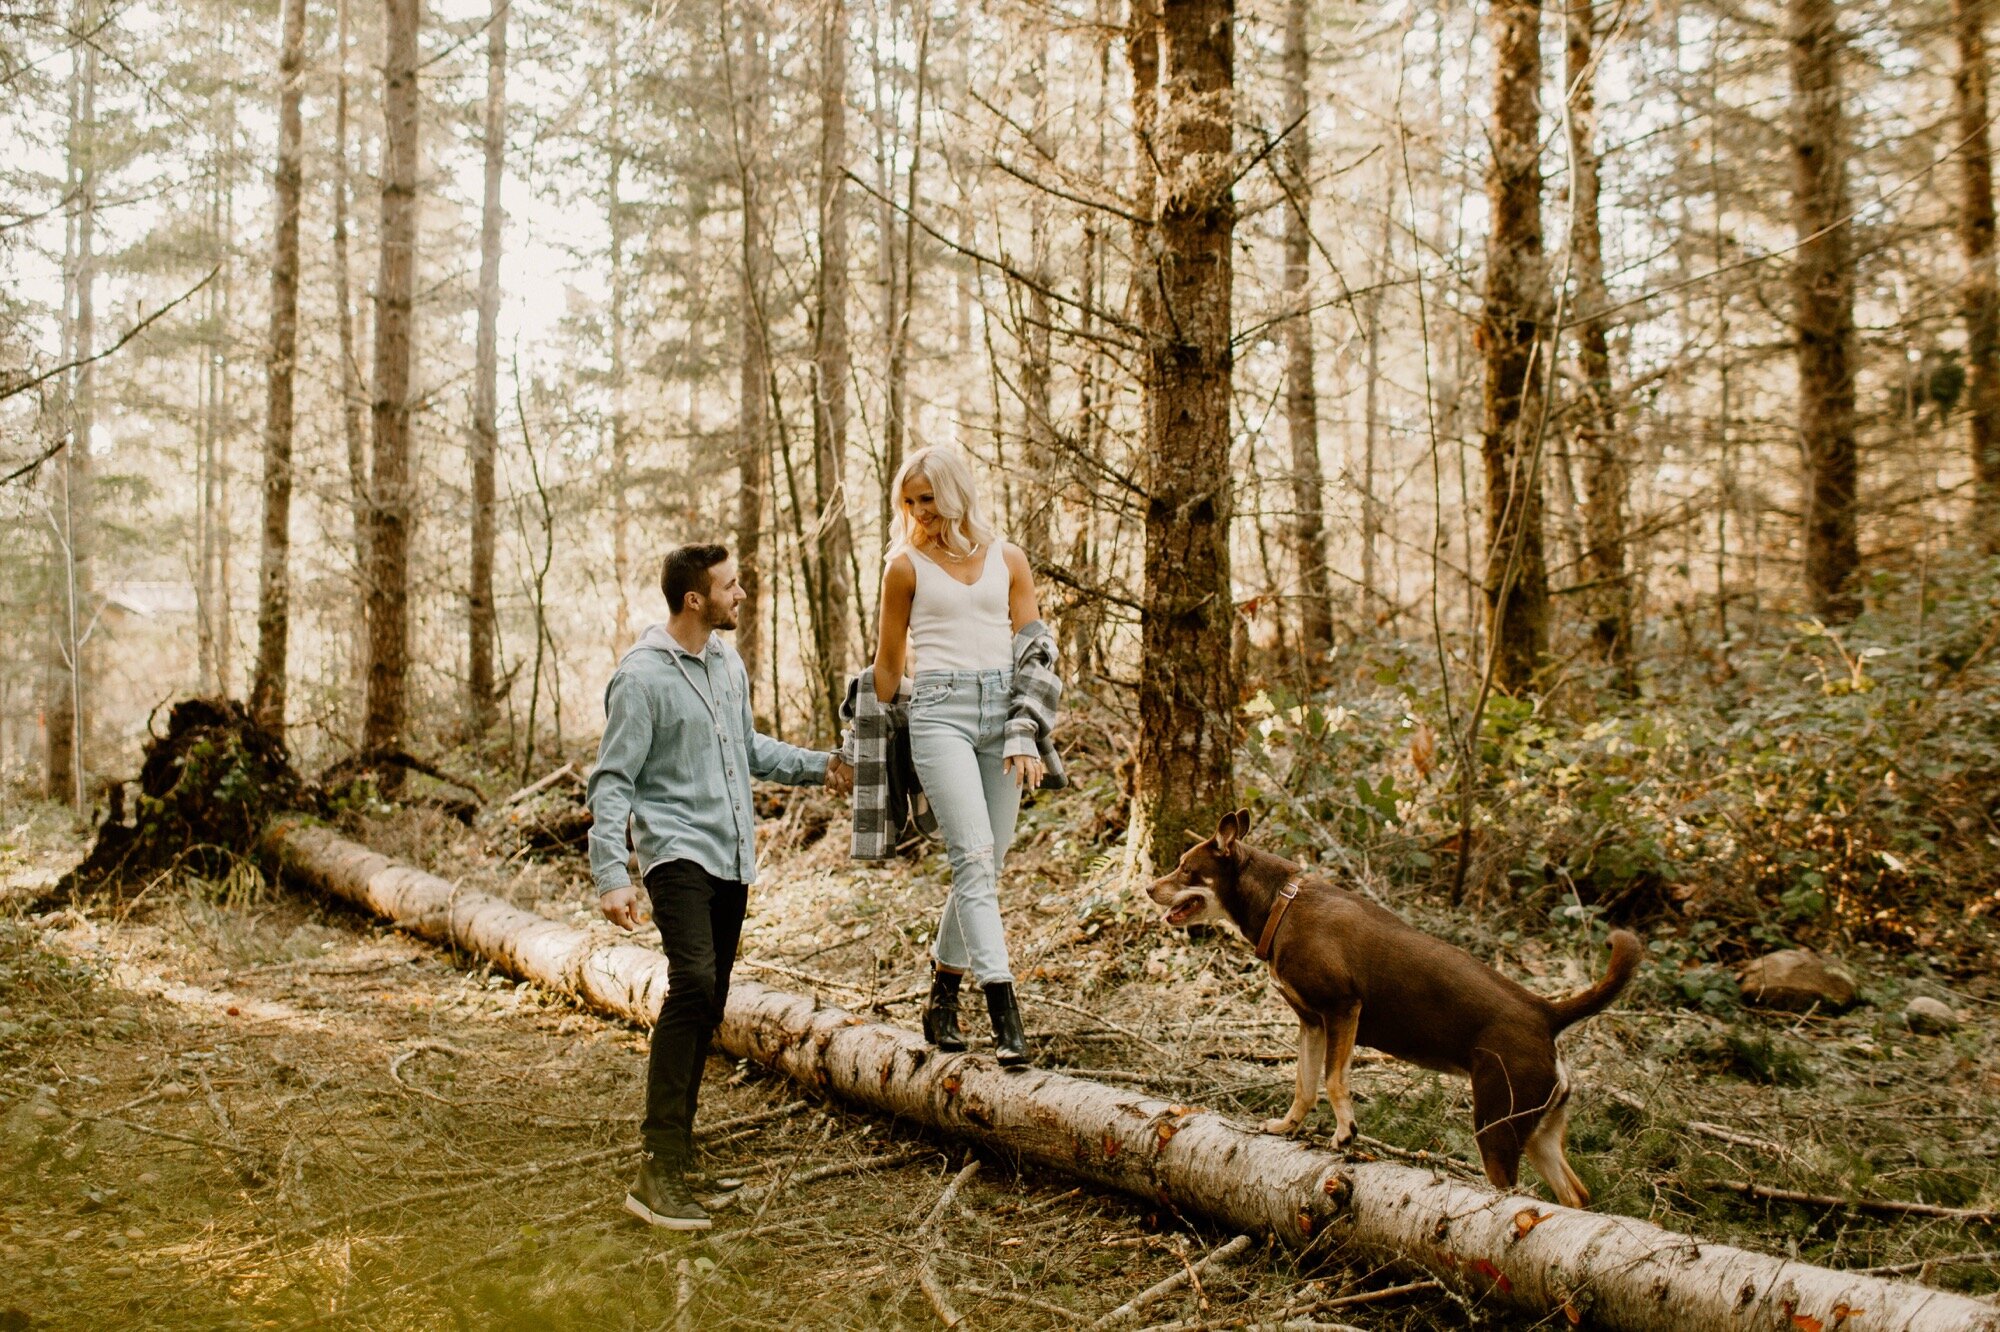 01_ginapaulson_briandtrent_engagement-34_PNW Forest Engagement Session.jpg